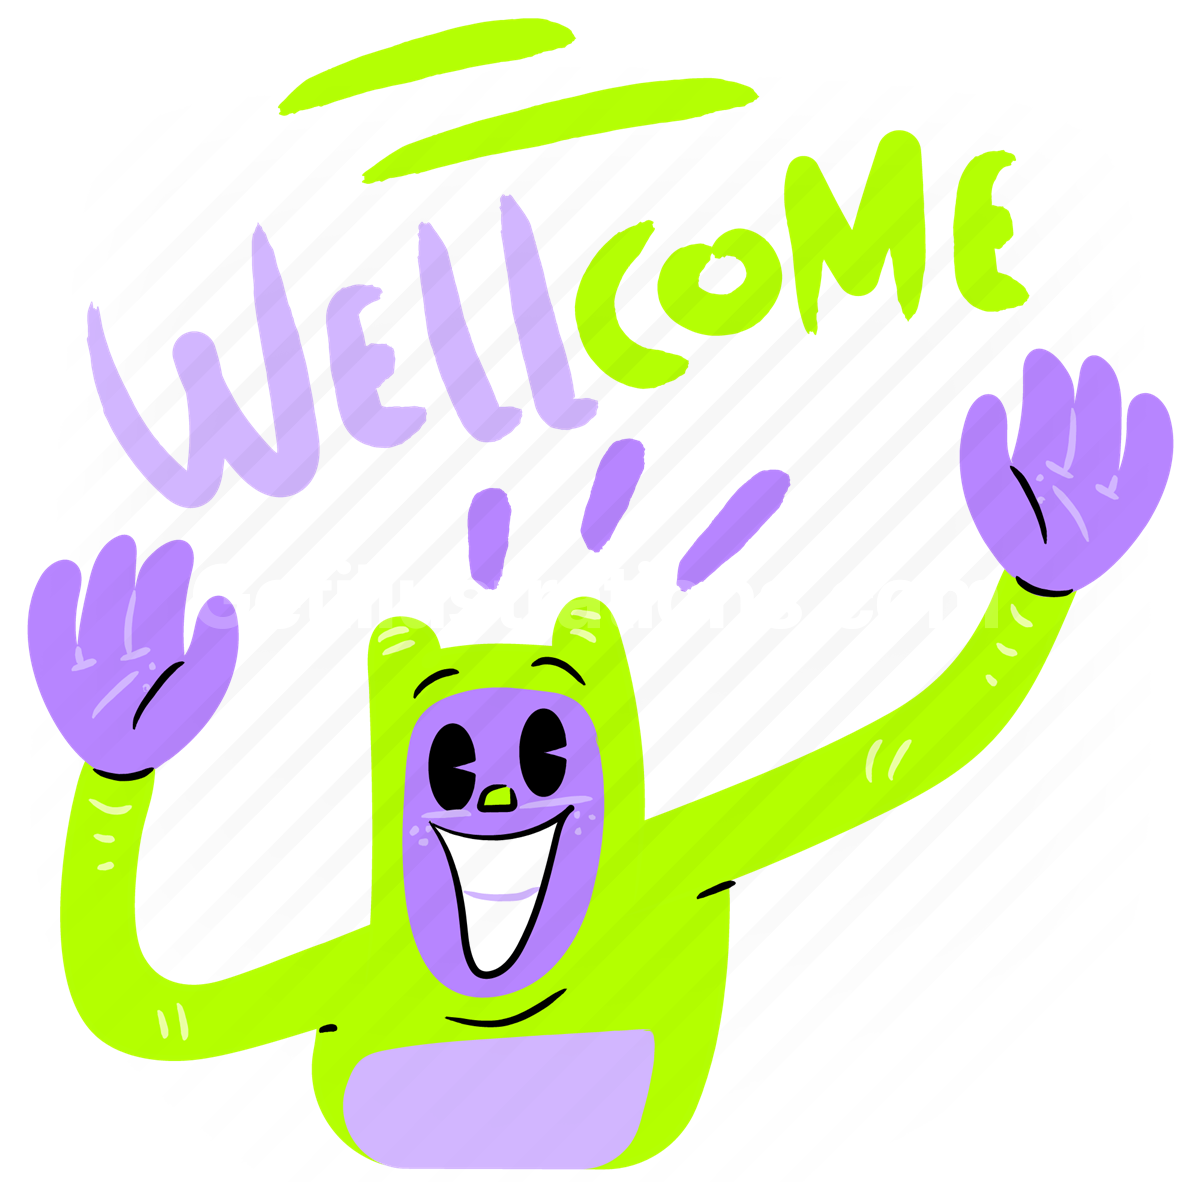 welcome, greeting, smile, happy, face, sticker, smiley, character